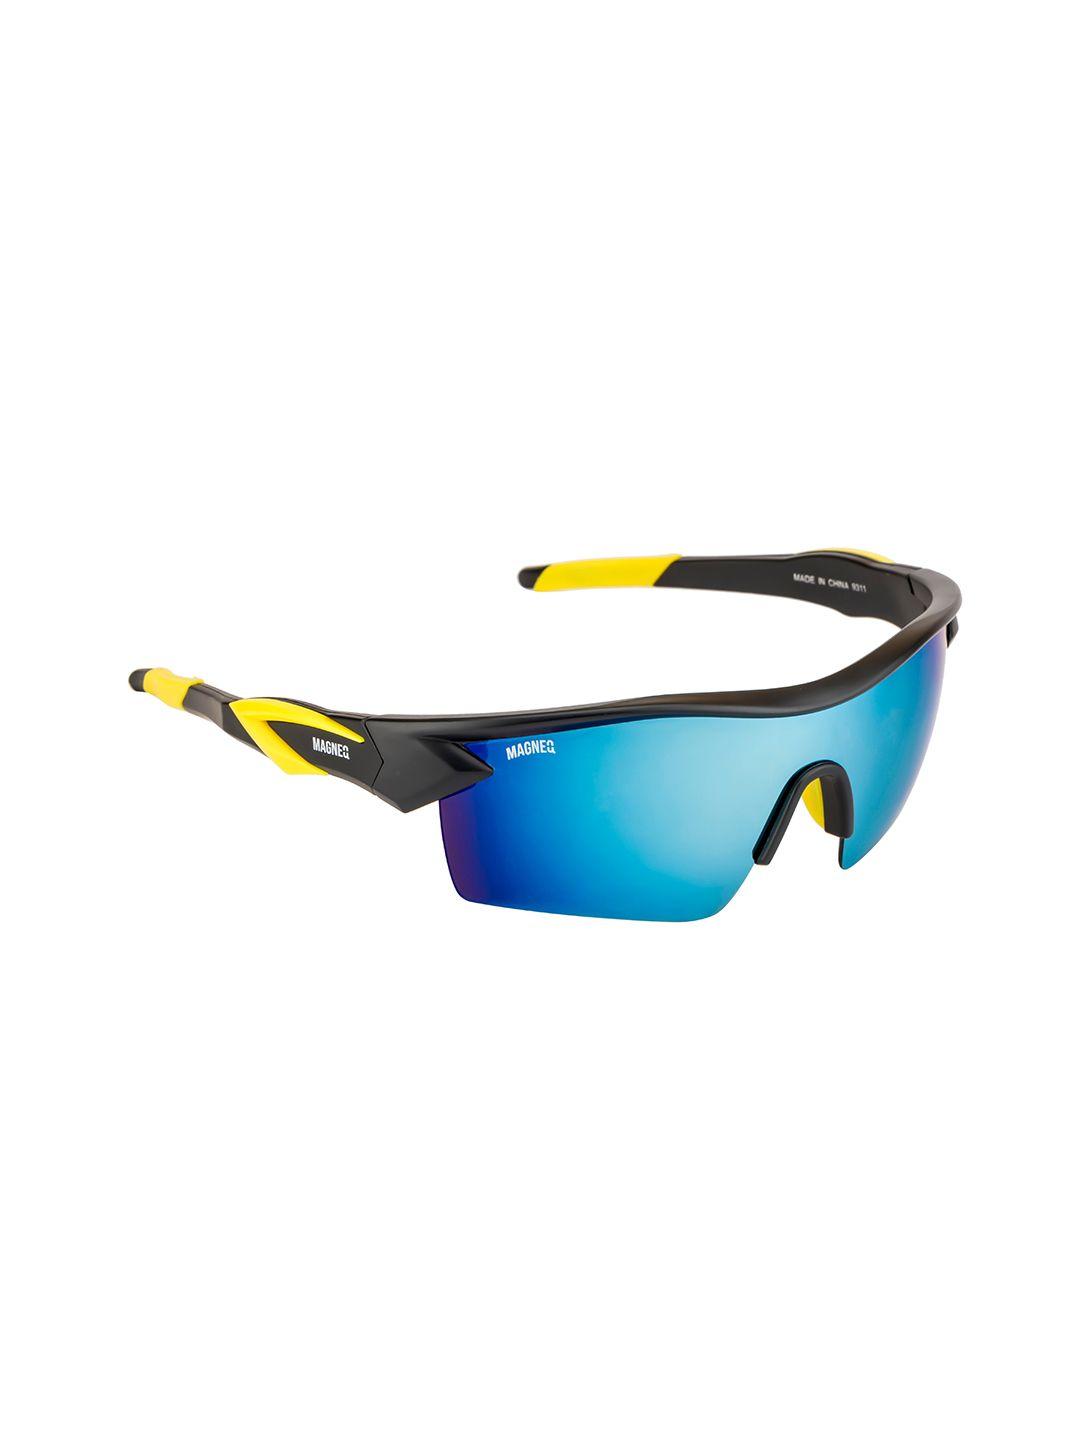 magneq sports sunglasses with uv protected lens mg 9311/s c6 6617